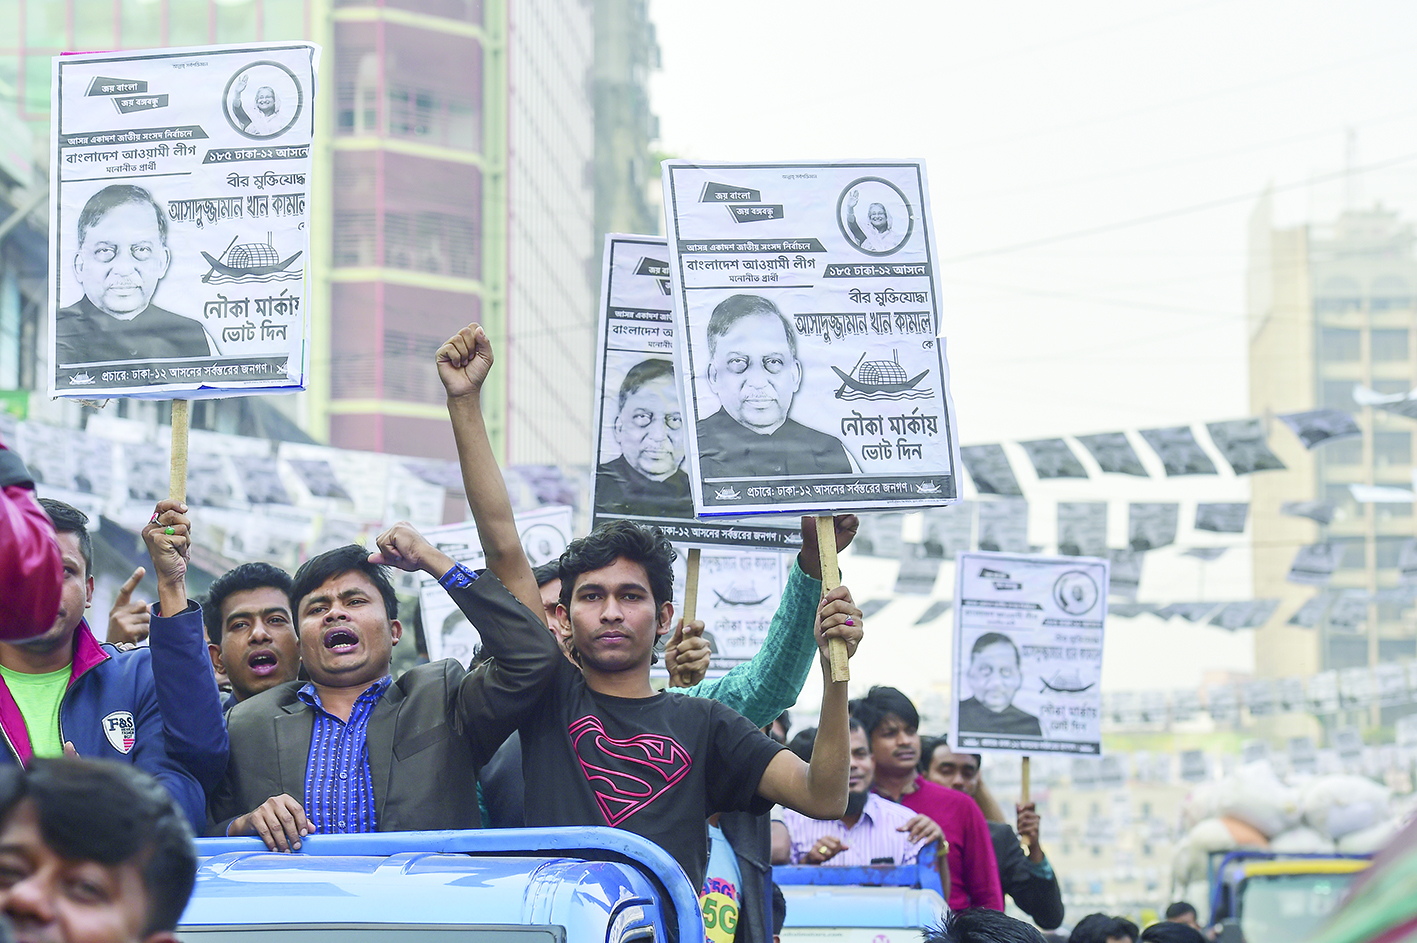 Supporters of Bangladesh Awami League march in the street as they take part in a general election campaign procession in Dhaka on December 26, 2018. - New clashes marred the deadly Bangladesh election campaign on December 26 as opposition leaders stepped up complaints over the organisation of what they consider a one-sided vote. (Photo by MUNIR UZ ZAMAN / AFP)